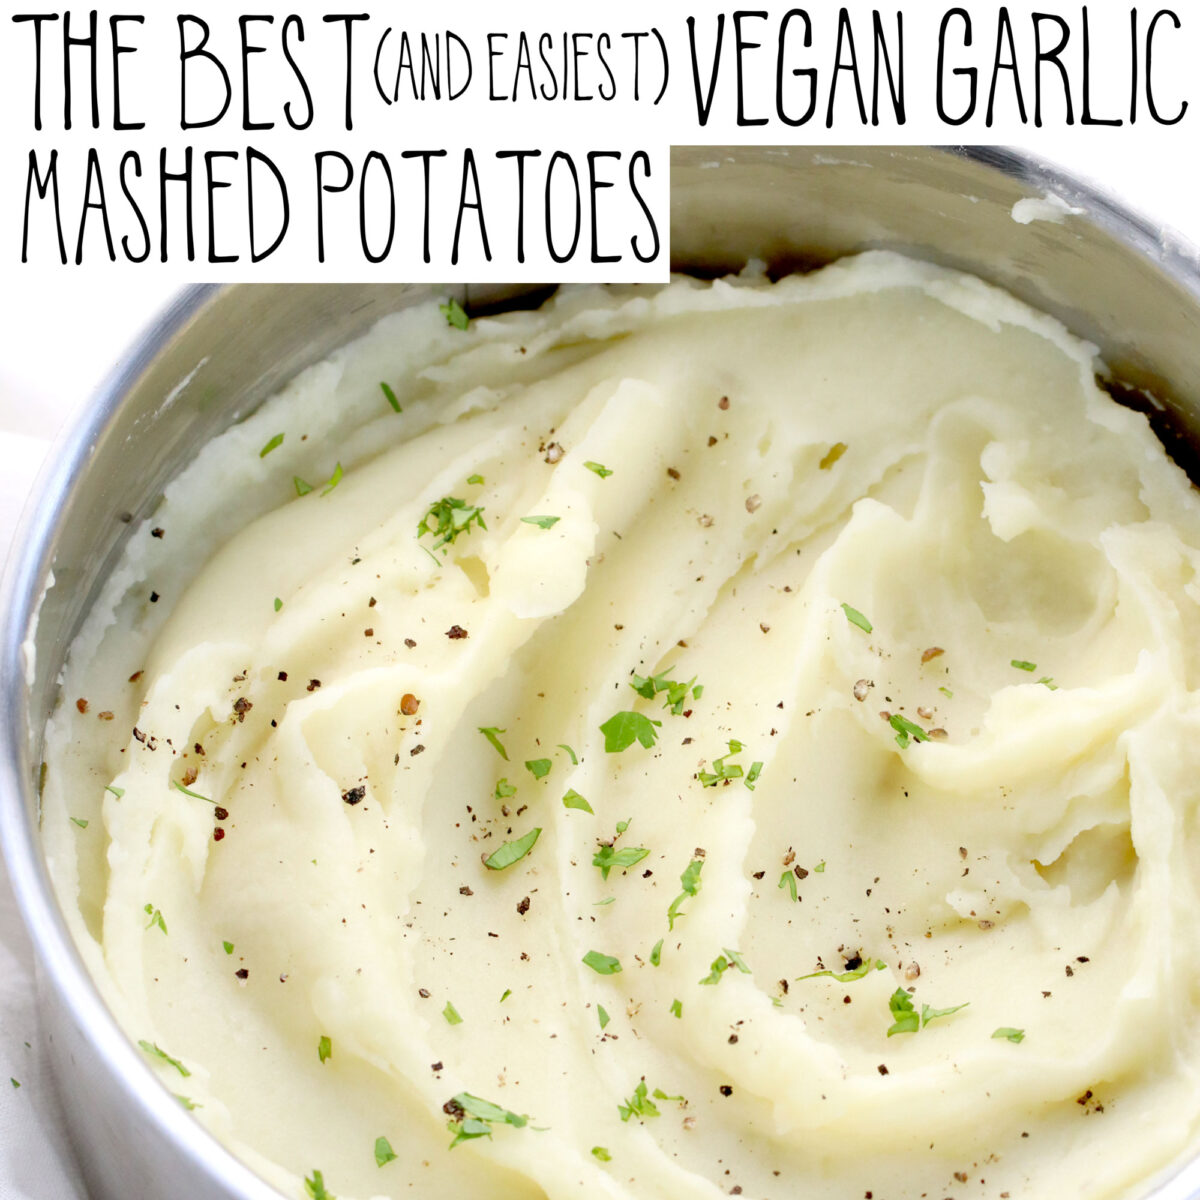 The Best (and easiest) Vegan Garlic Mashed Potatoes